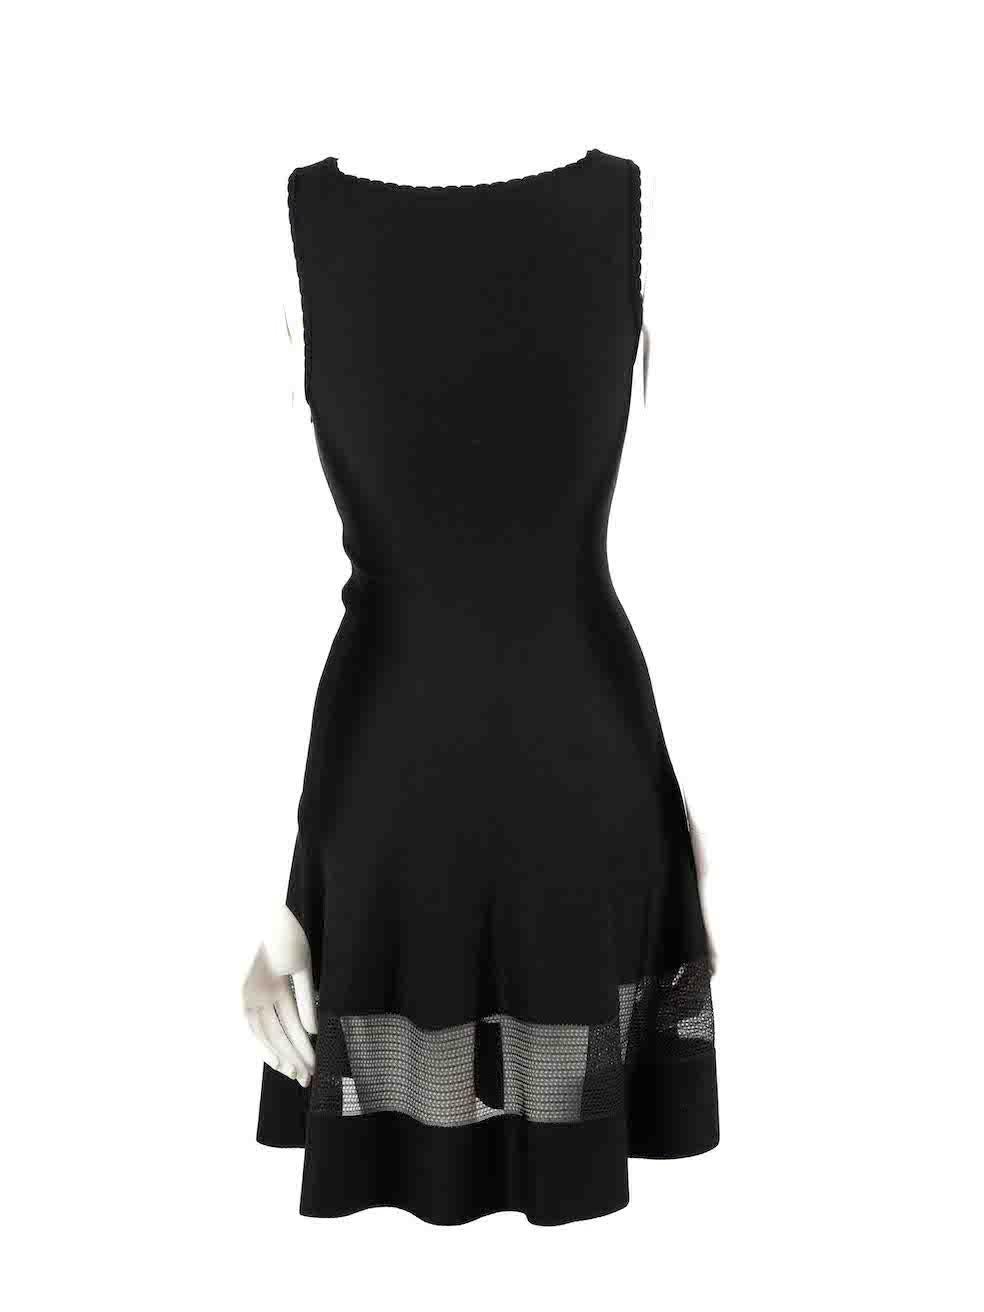 Alaïa Black Mesh Panelled Knee Length Dress Size S In Excellent Condition For Sale In London, GB